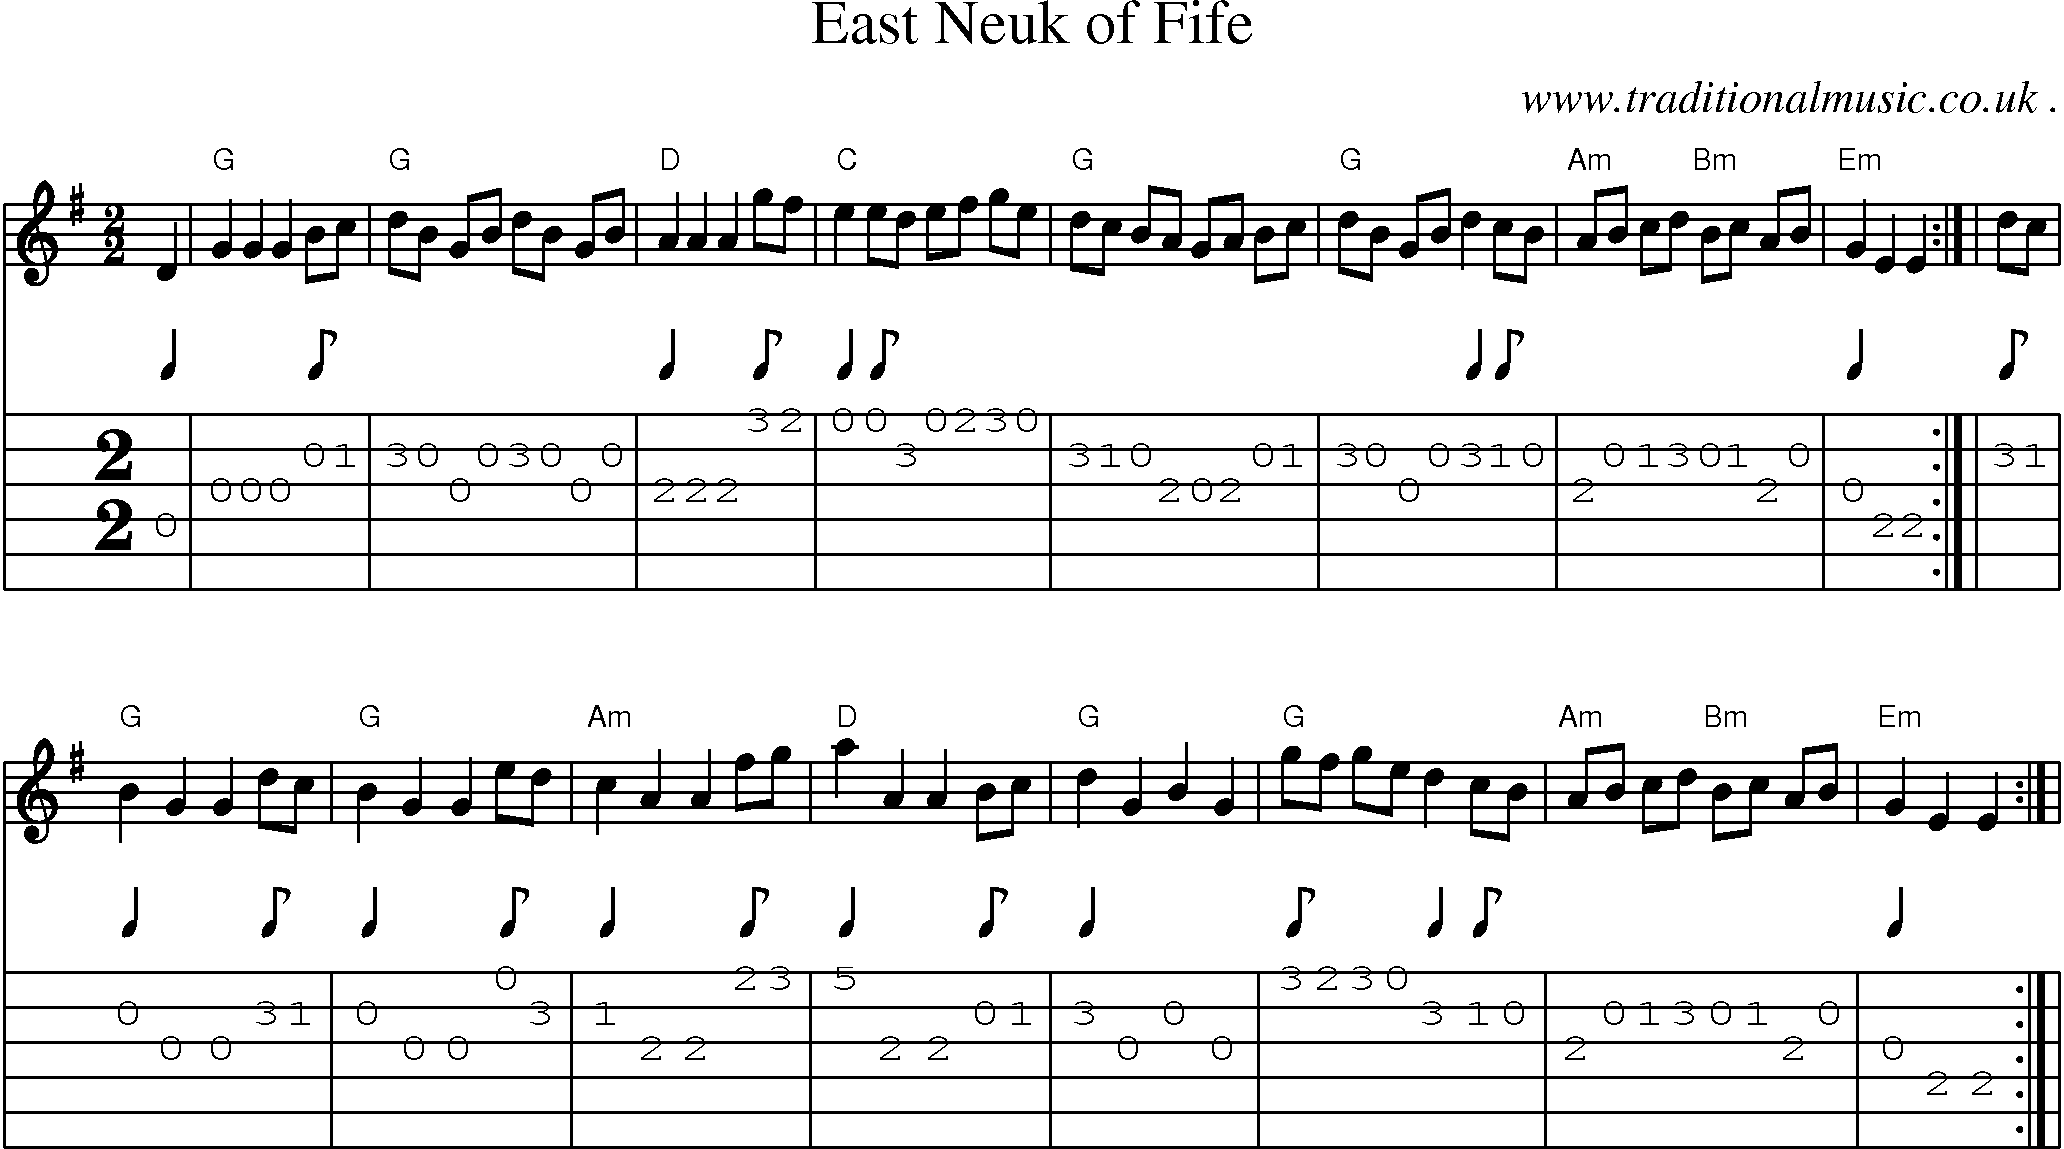 Sheet-music  score, Chords and Guitar Tabs for East Neuk Of Fife